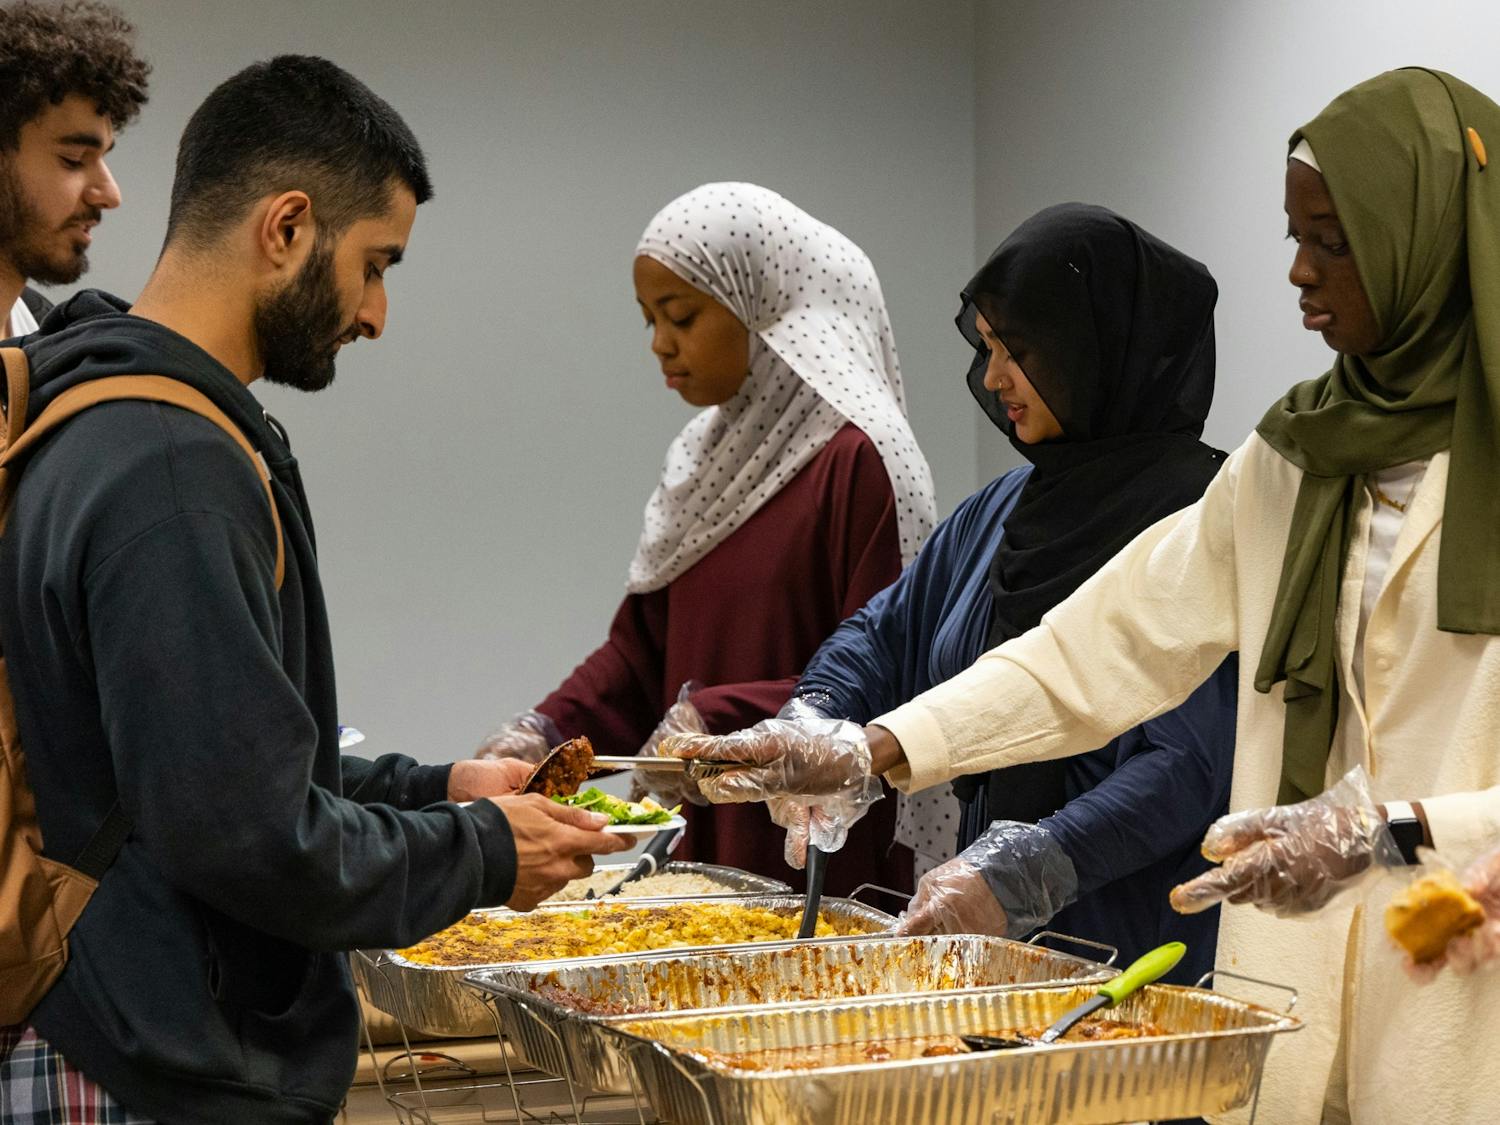 Sarah Jimenez, Miriam Matin and Ndumbeh Boye serve a variety of food, including macaroni and cheese and braised chicken, to students during Ramadan in Chapel Hill, N.C., on Monday, April 3, 2023. The UNC Muslim Student Association collaborated with Chef Jimenez to provide food for those breaking their fast after dusk.